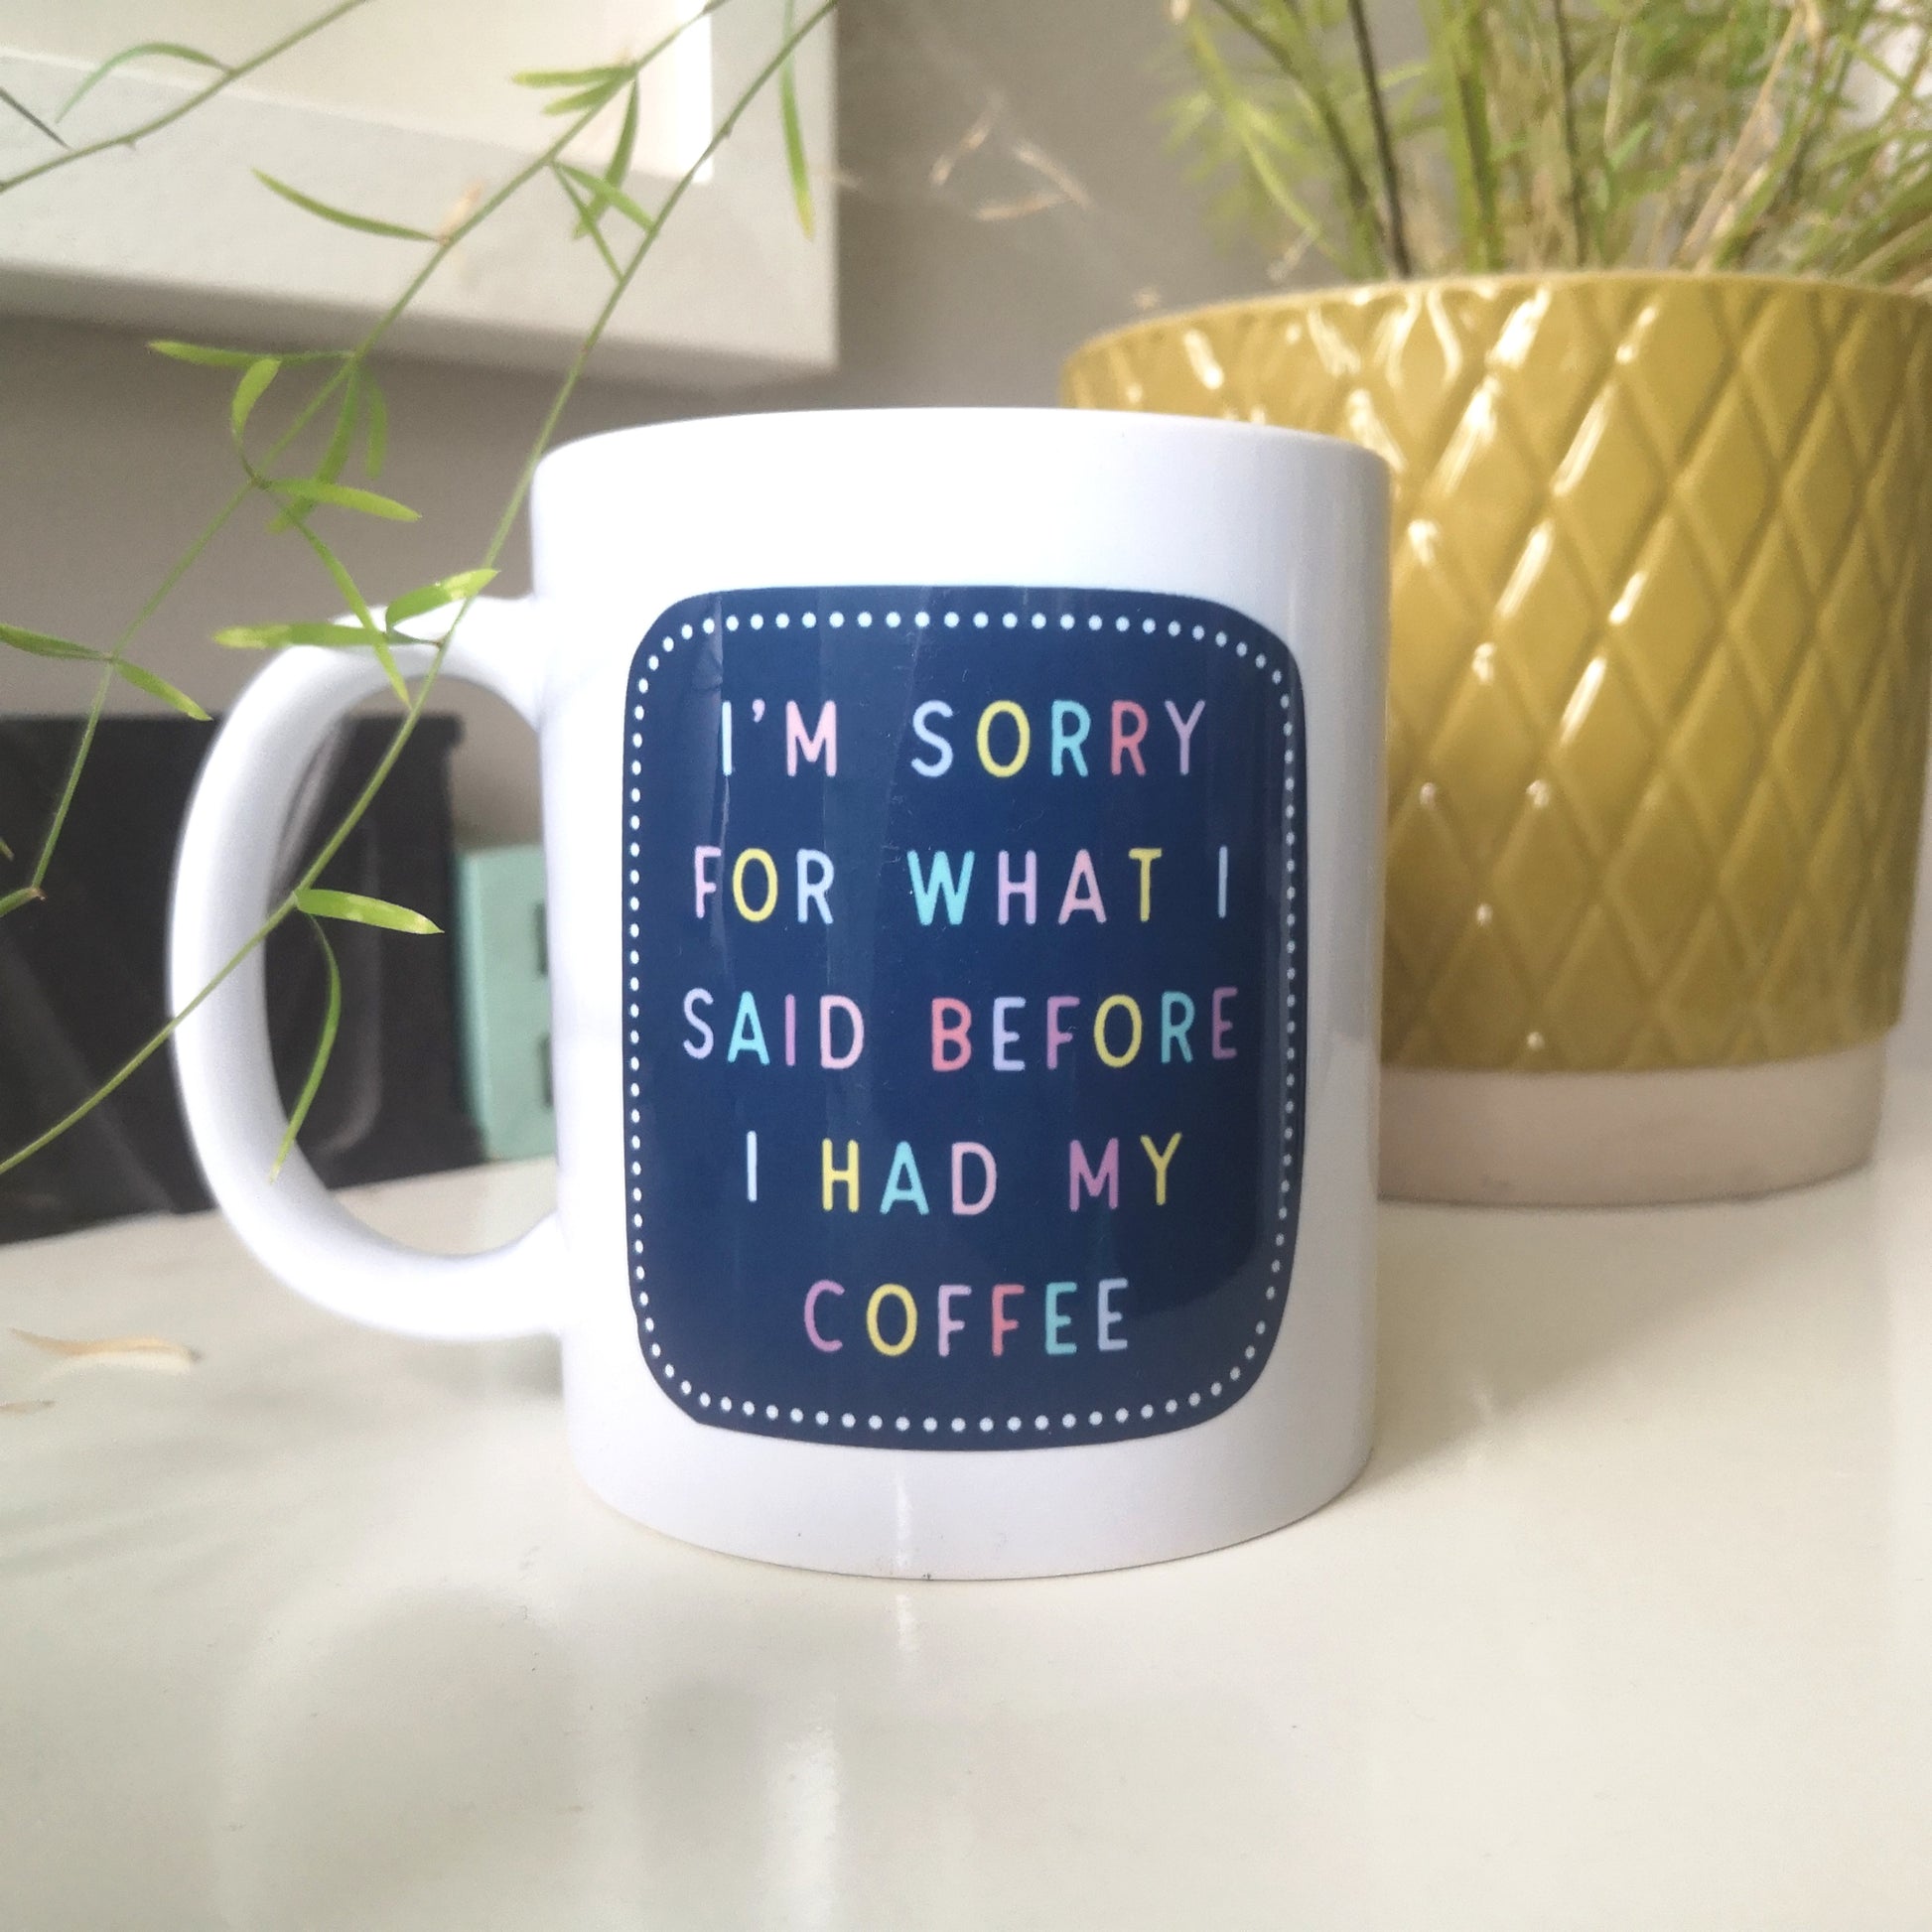 A ceramic mug with 'I'M SORRY FOR WHAT I SAID BEFORE I HAD MY COFFEE' in colourful writing.